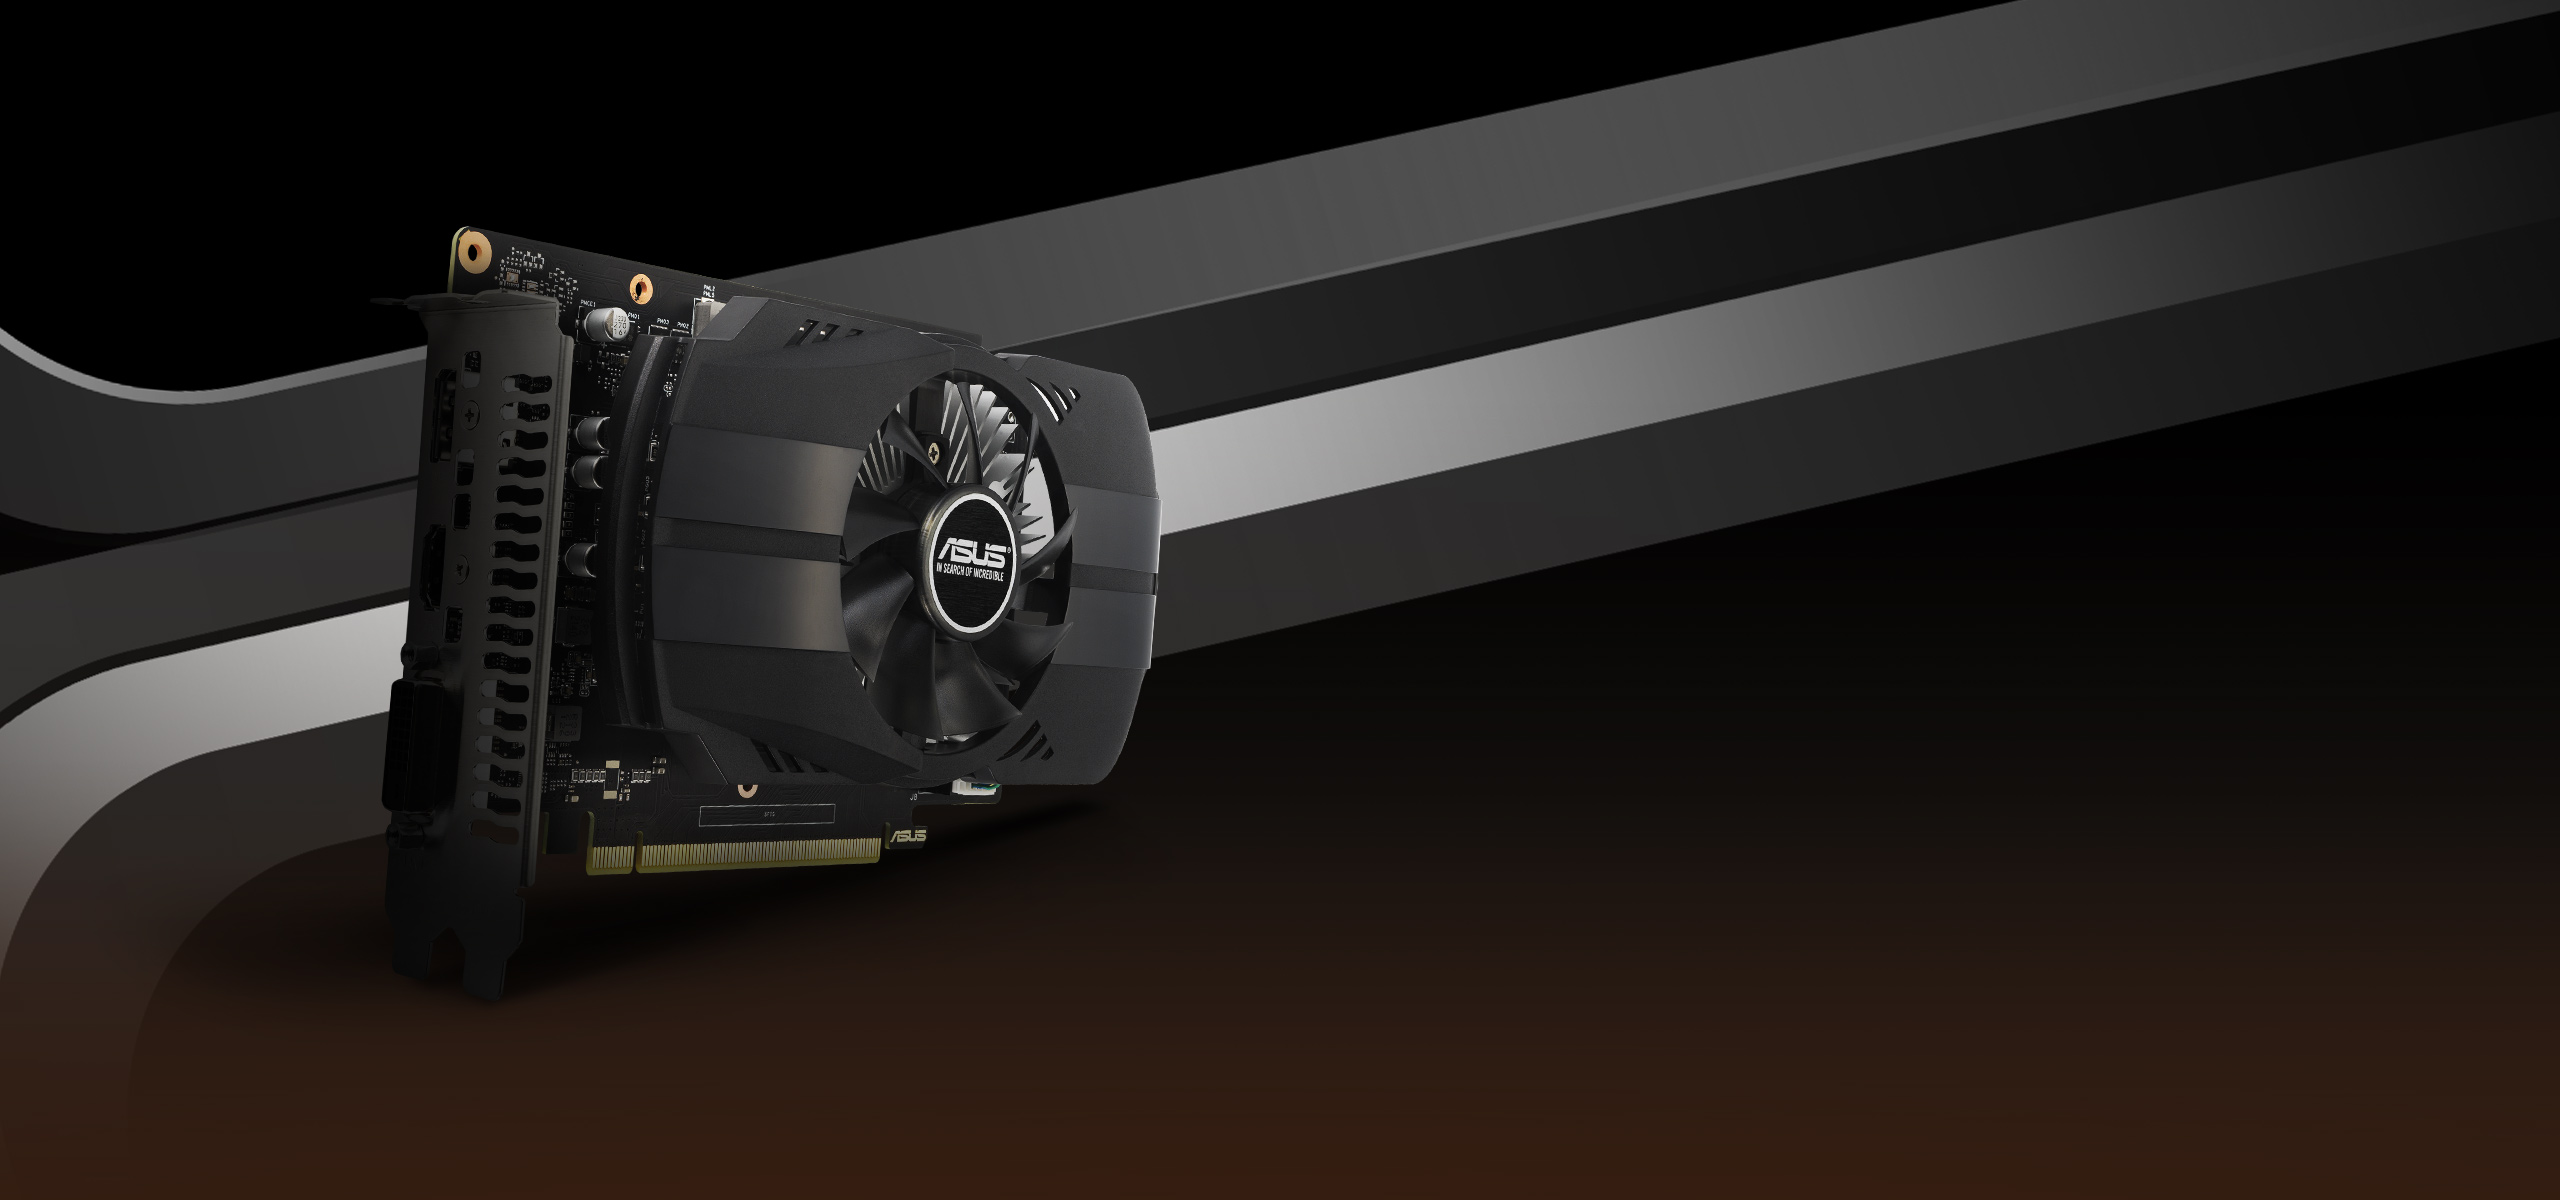 Front angled view of the ASUS Phoenix GeForce GTX 1630 EVO graphics card